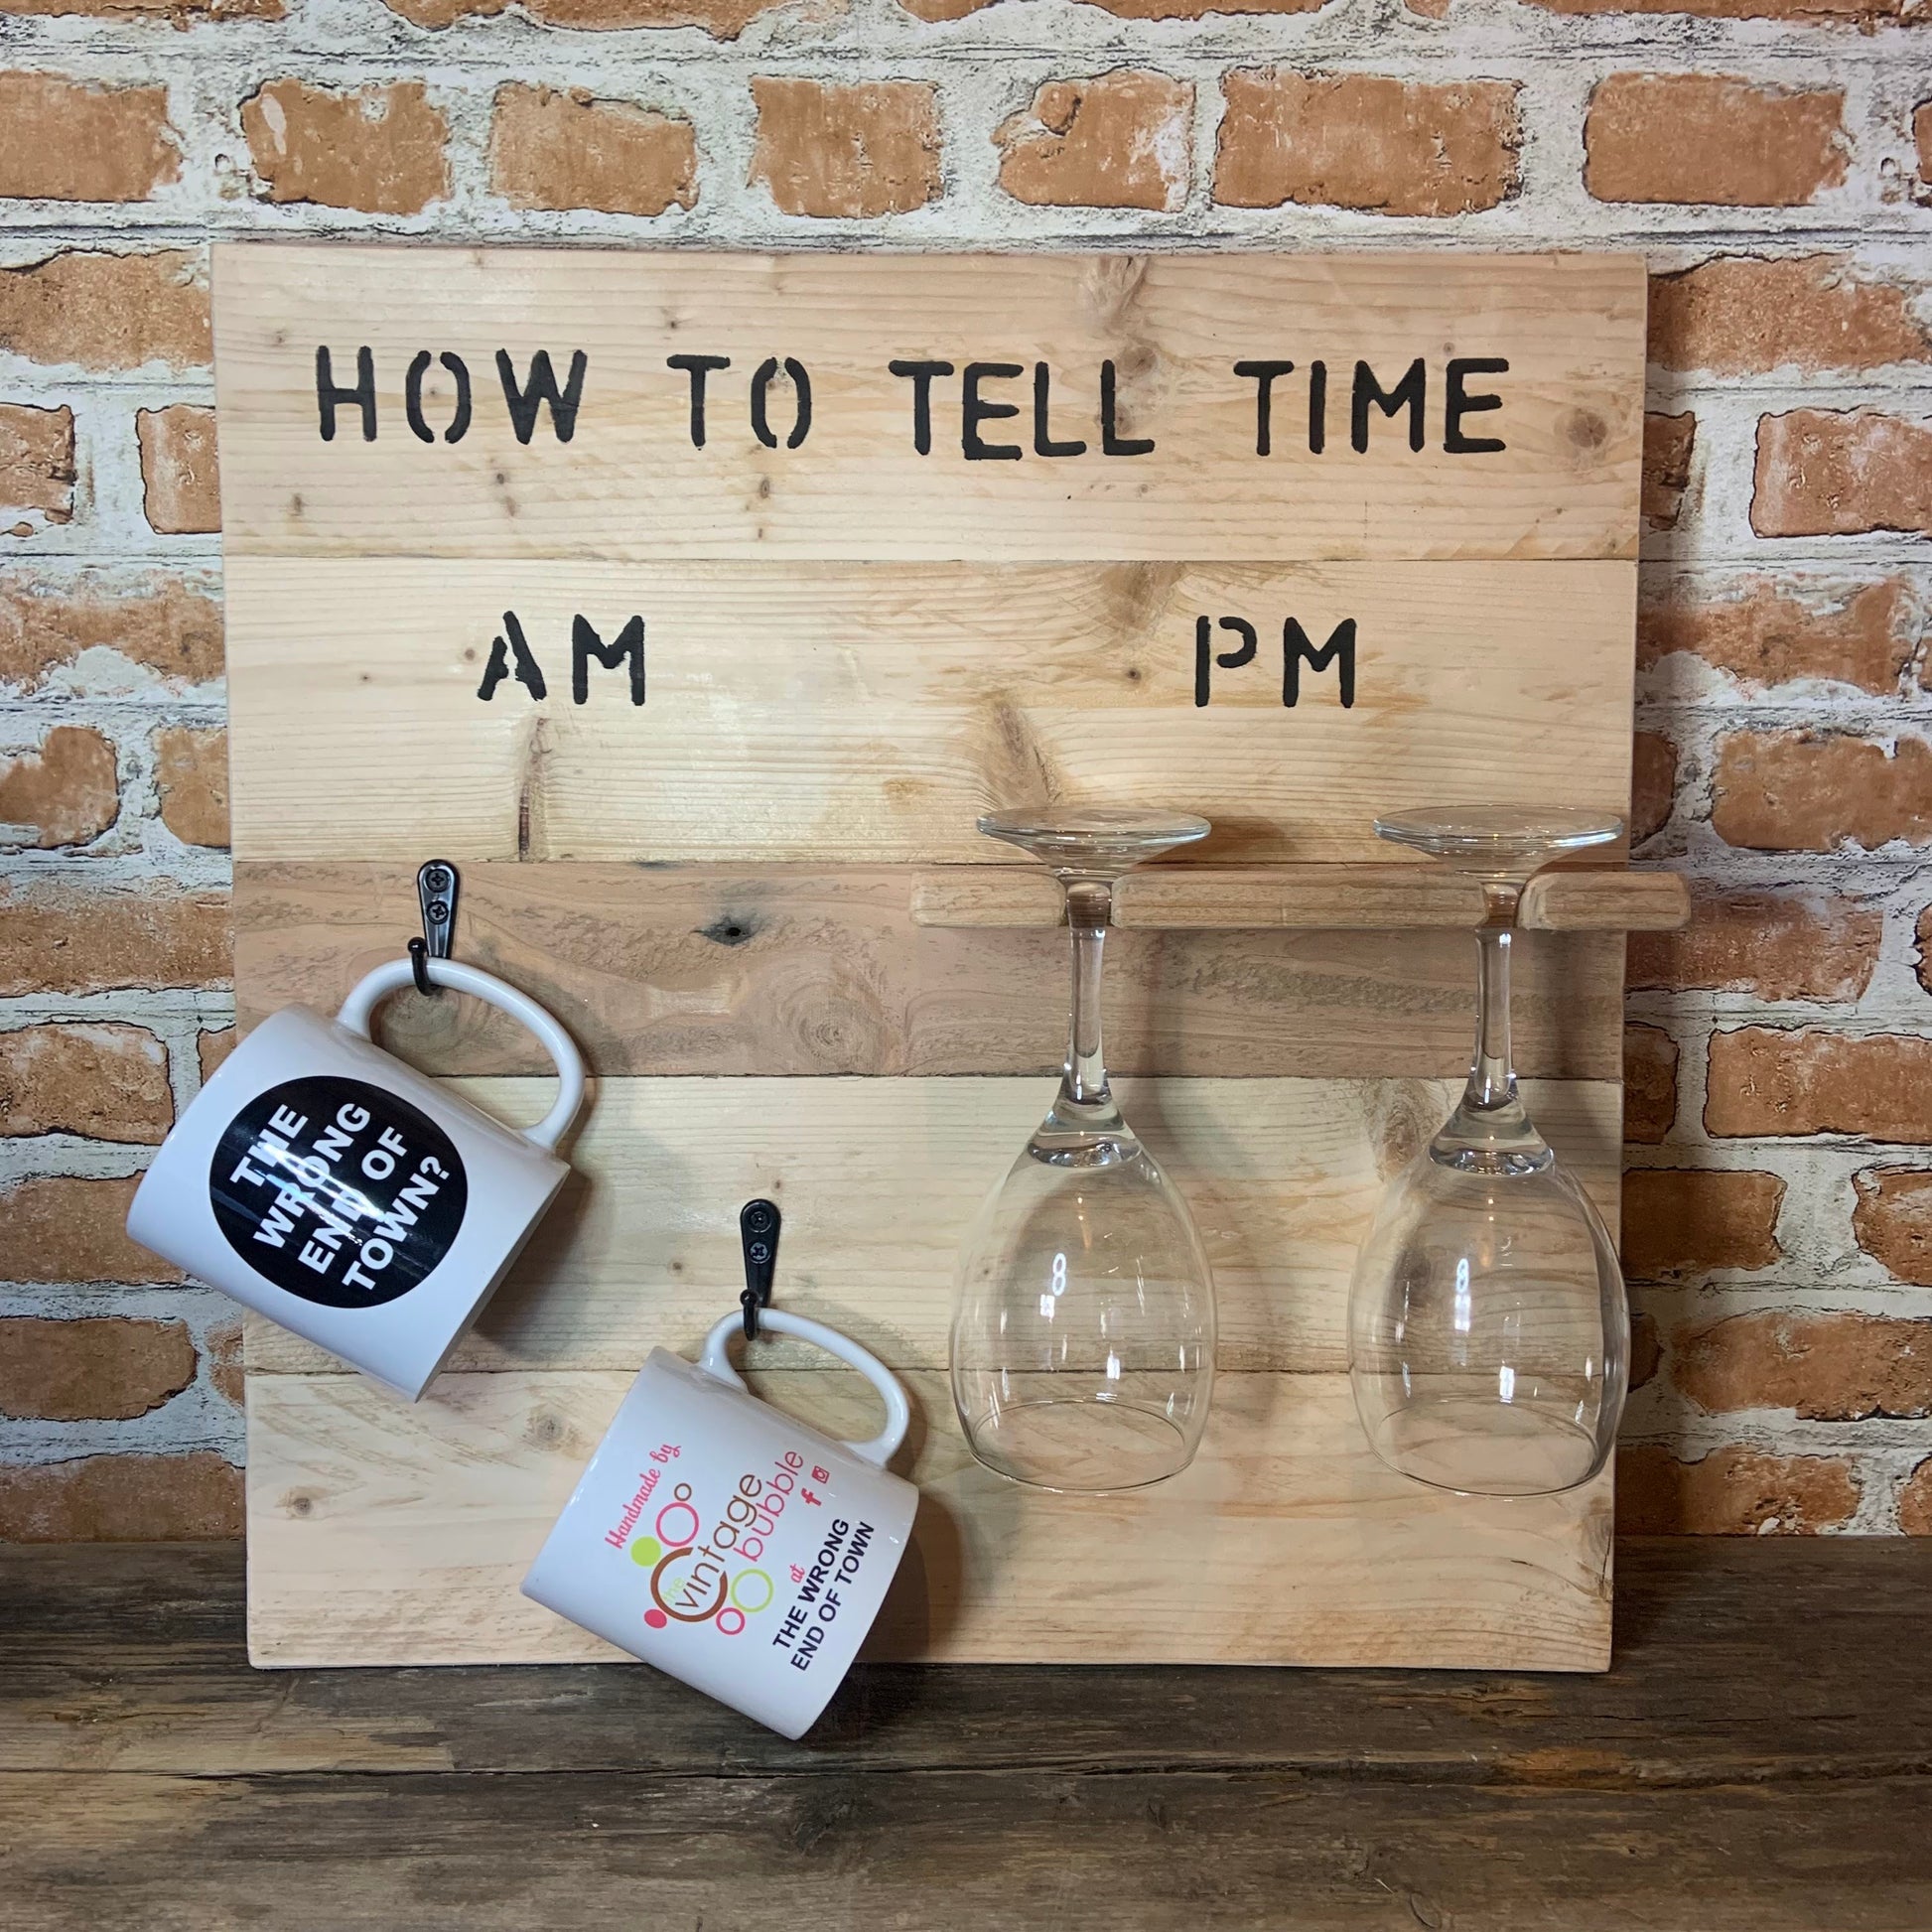 How to tell the time AM PM - coffee and wine plaque from The Wrong End of Town